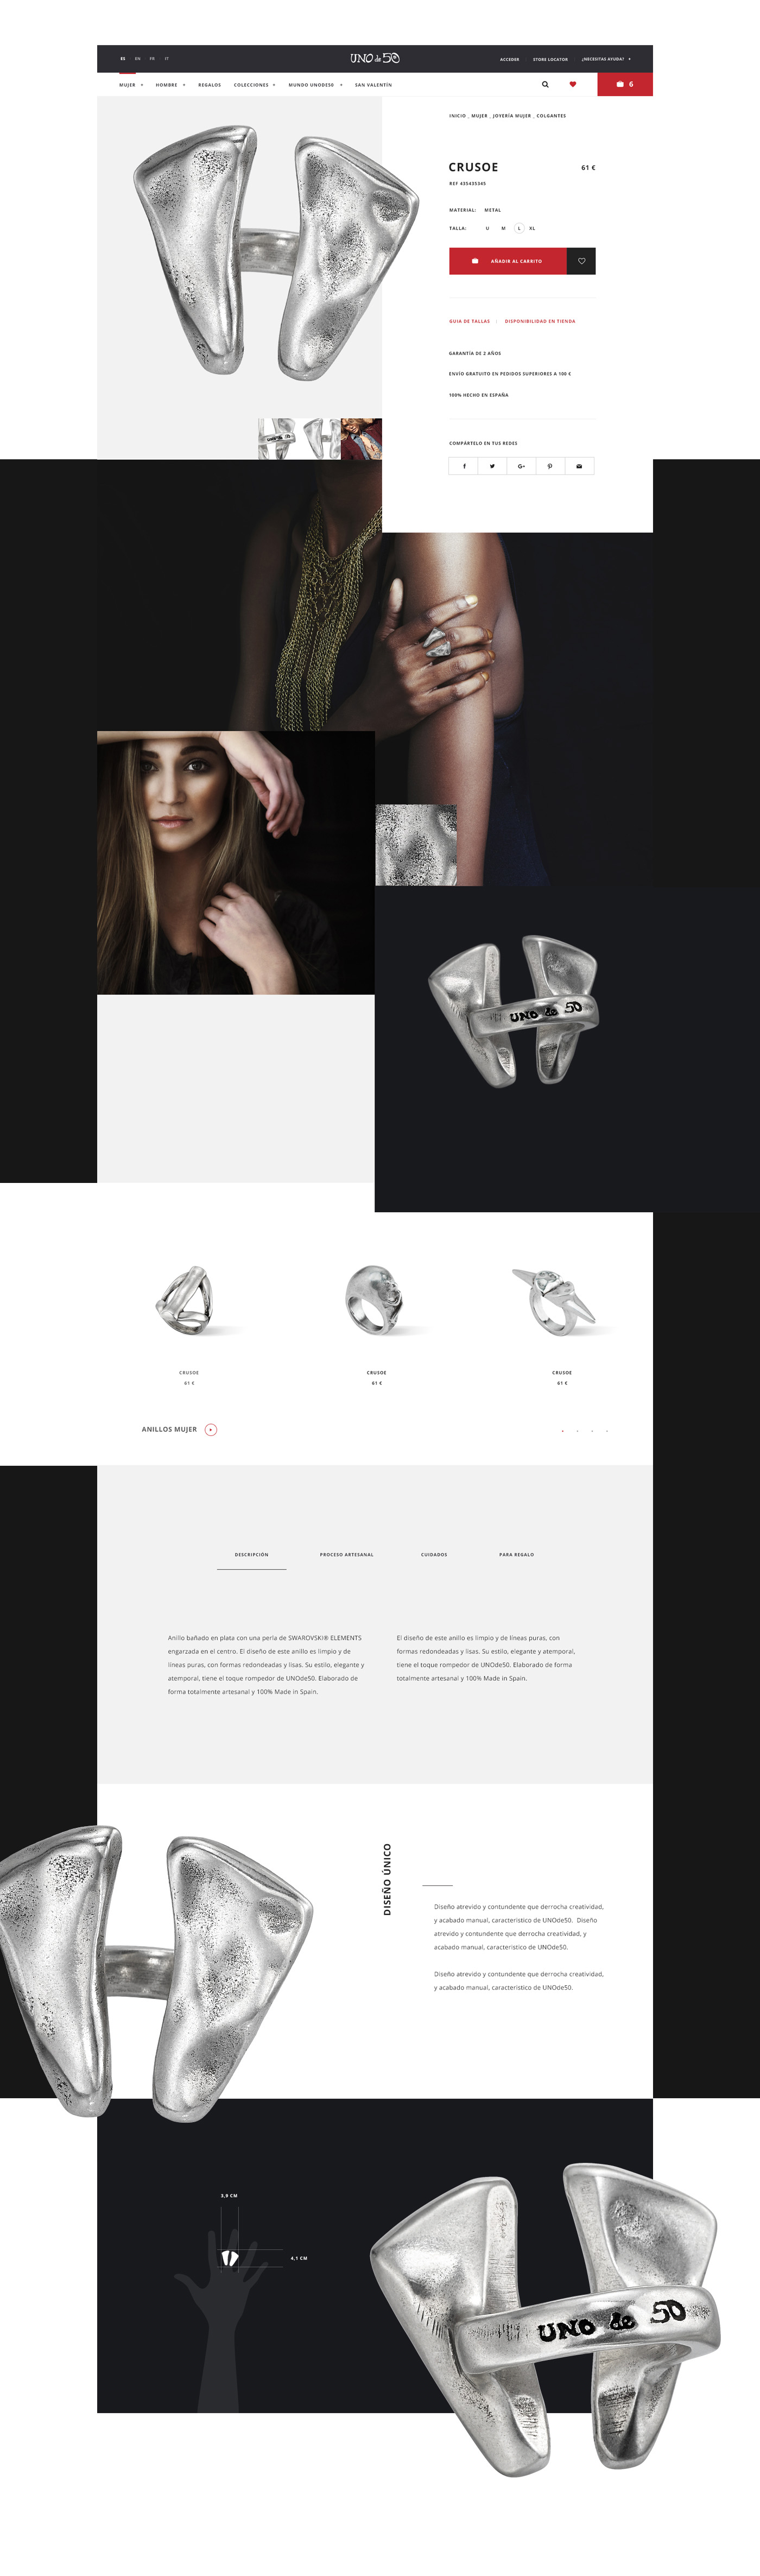 Ecommerce Web Design  ux UI shop jewelry user interface user experience Responsive app